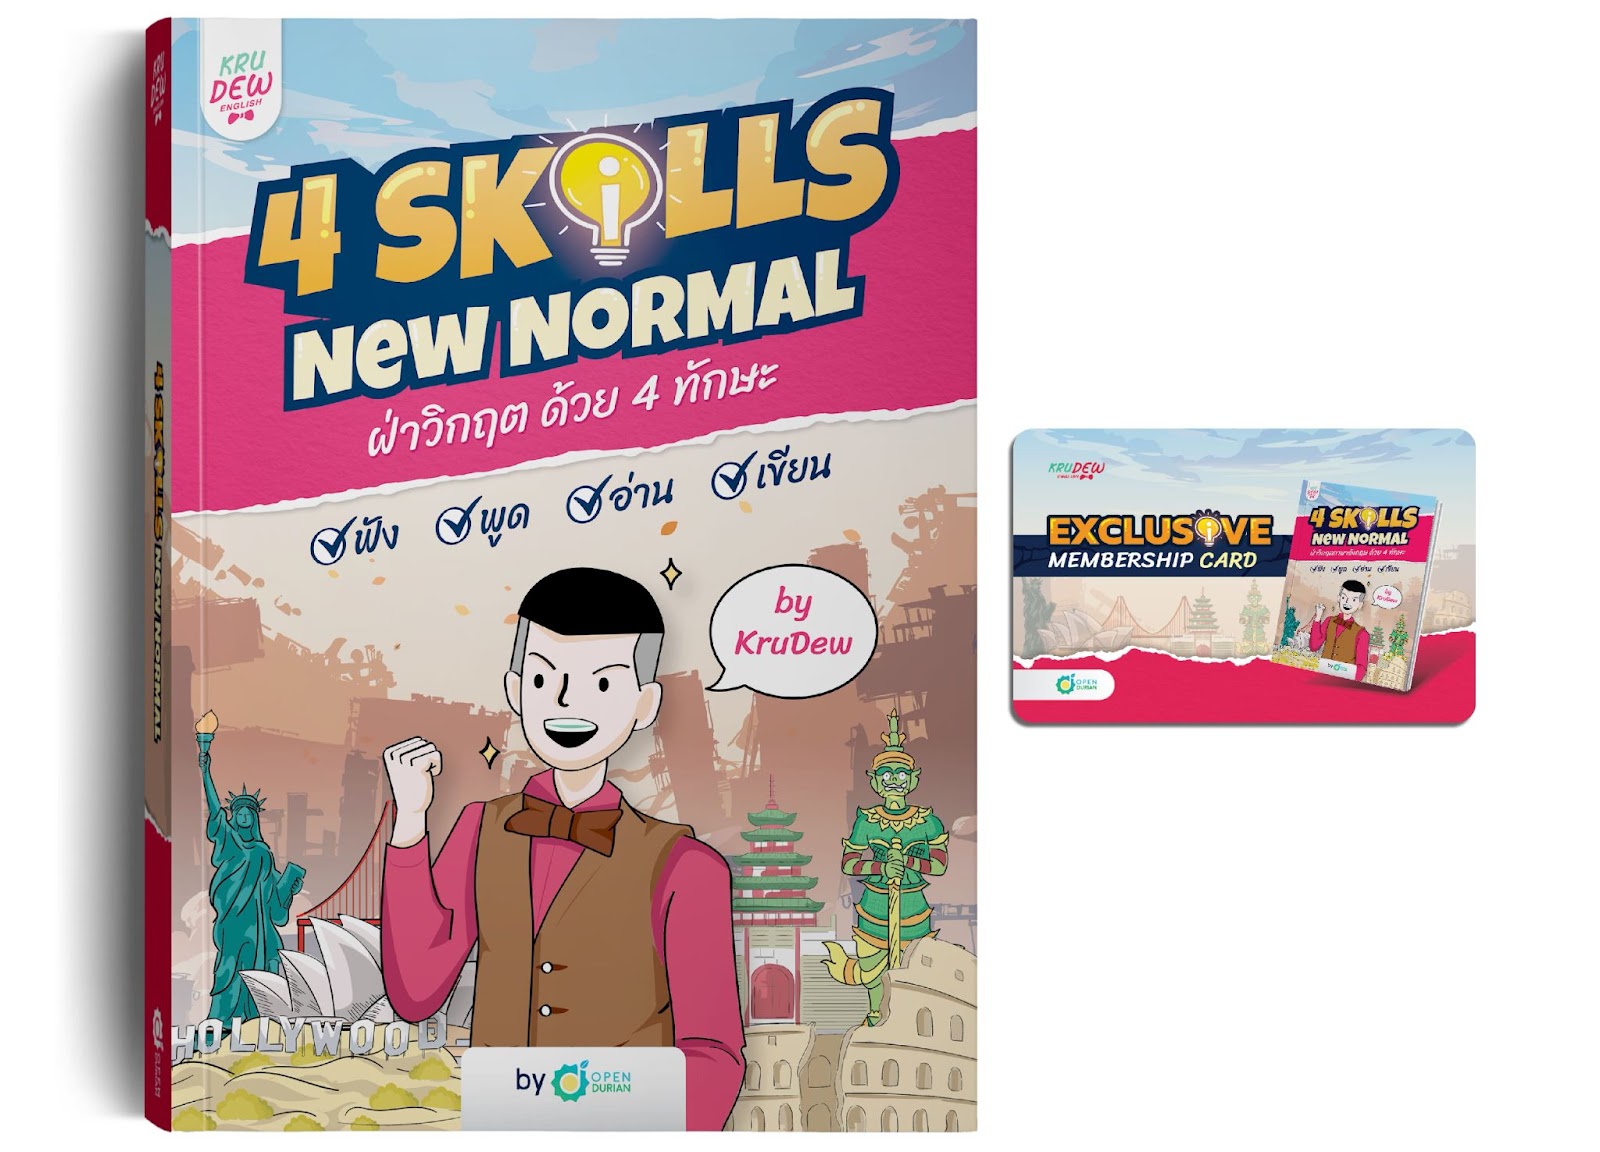 an illustrated book cover titled 4 SKILLS NEW NORMAL on the left and a membership card on the right